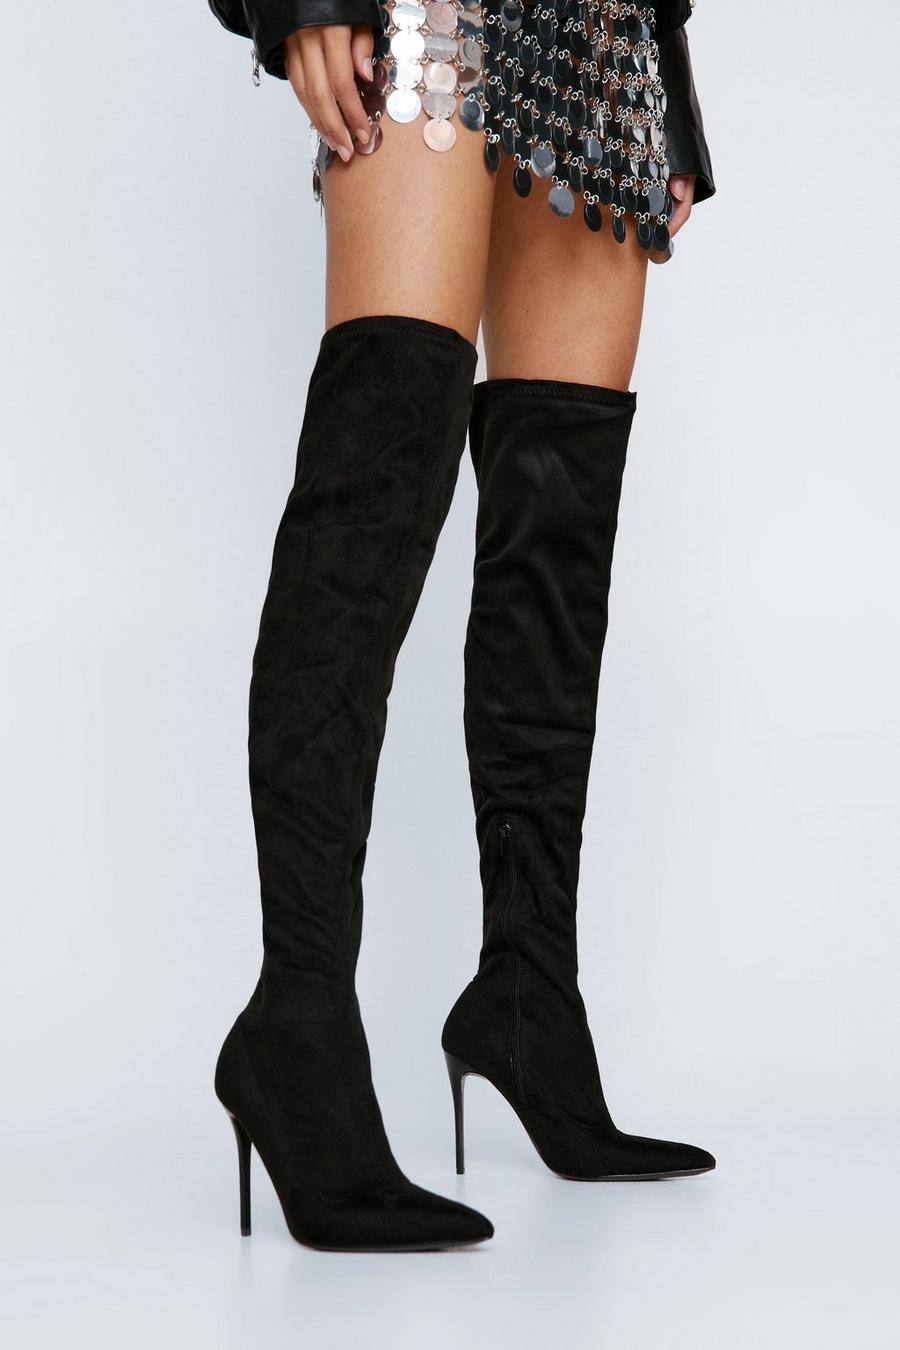 Over The Knee Boots | Thigh High Boots | Nasty Gal